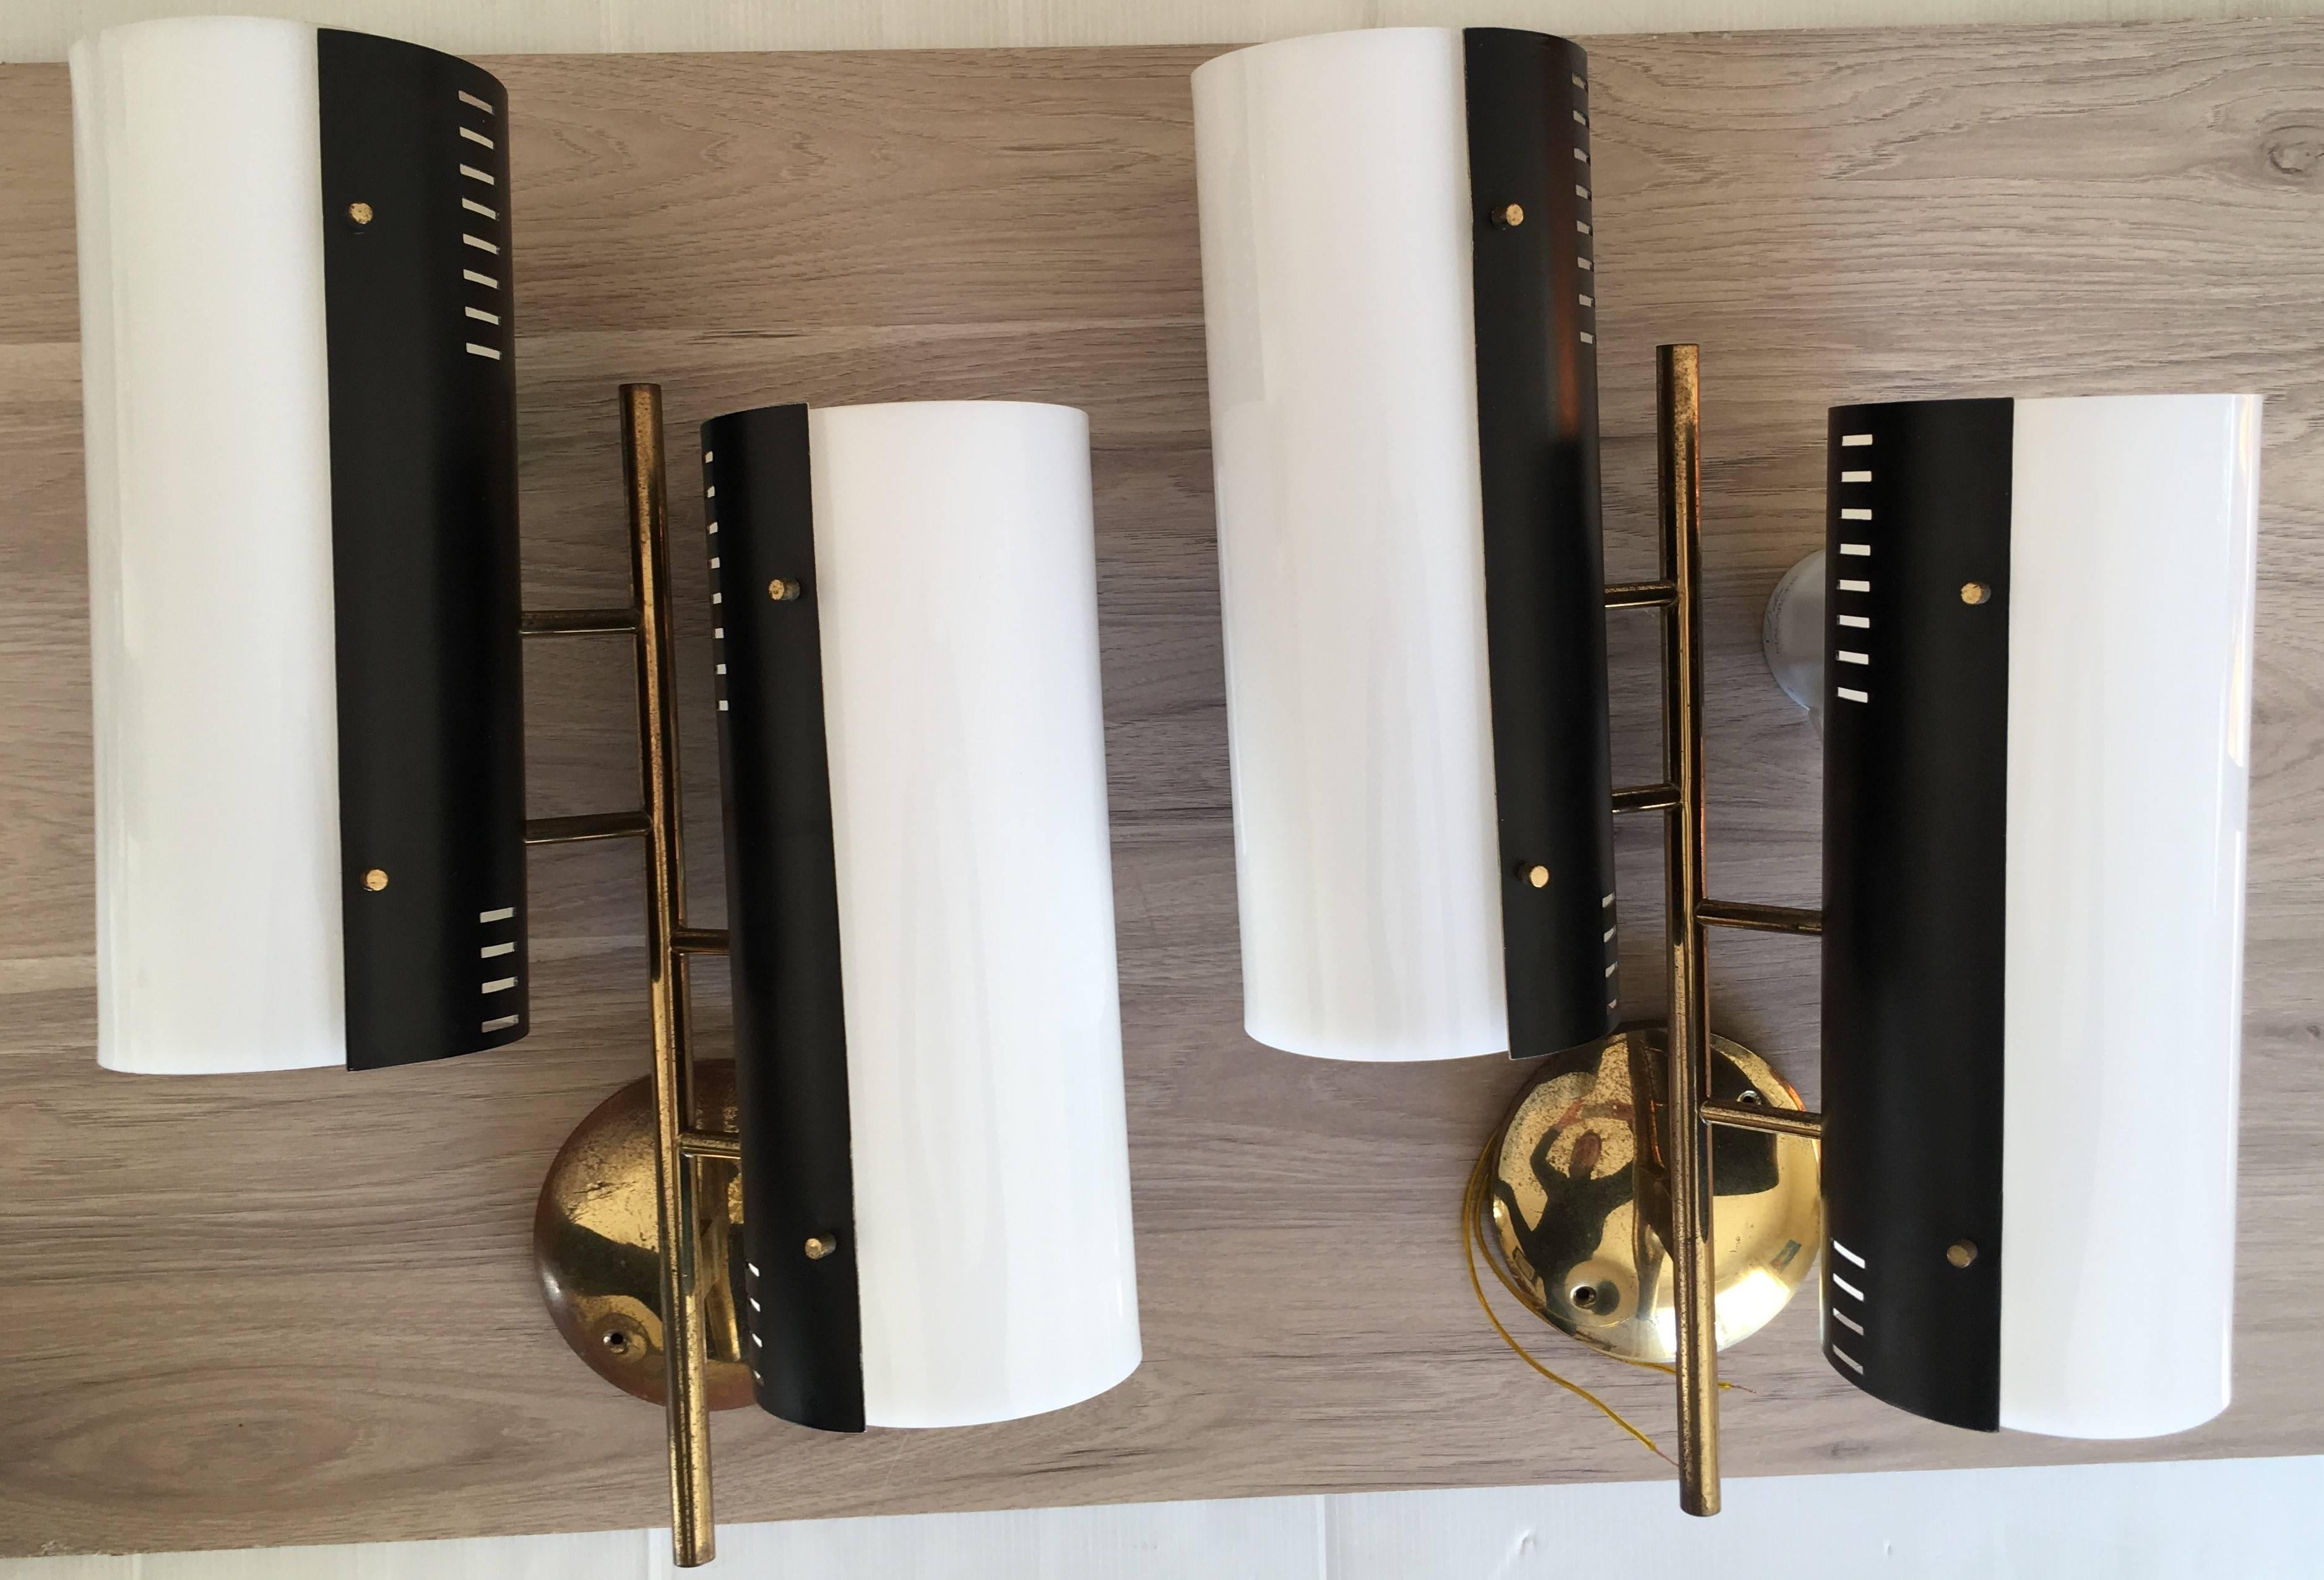 Modernist pair of wall lamps designed by Stilnovo Italy, circa 1950.
Gilded brass and black Lacquered frame with double white perspex sconces
Stilnovo label inside each black metal cylinder.
This large wall lamps size by Stilnovo is rare.
All parts